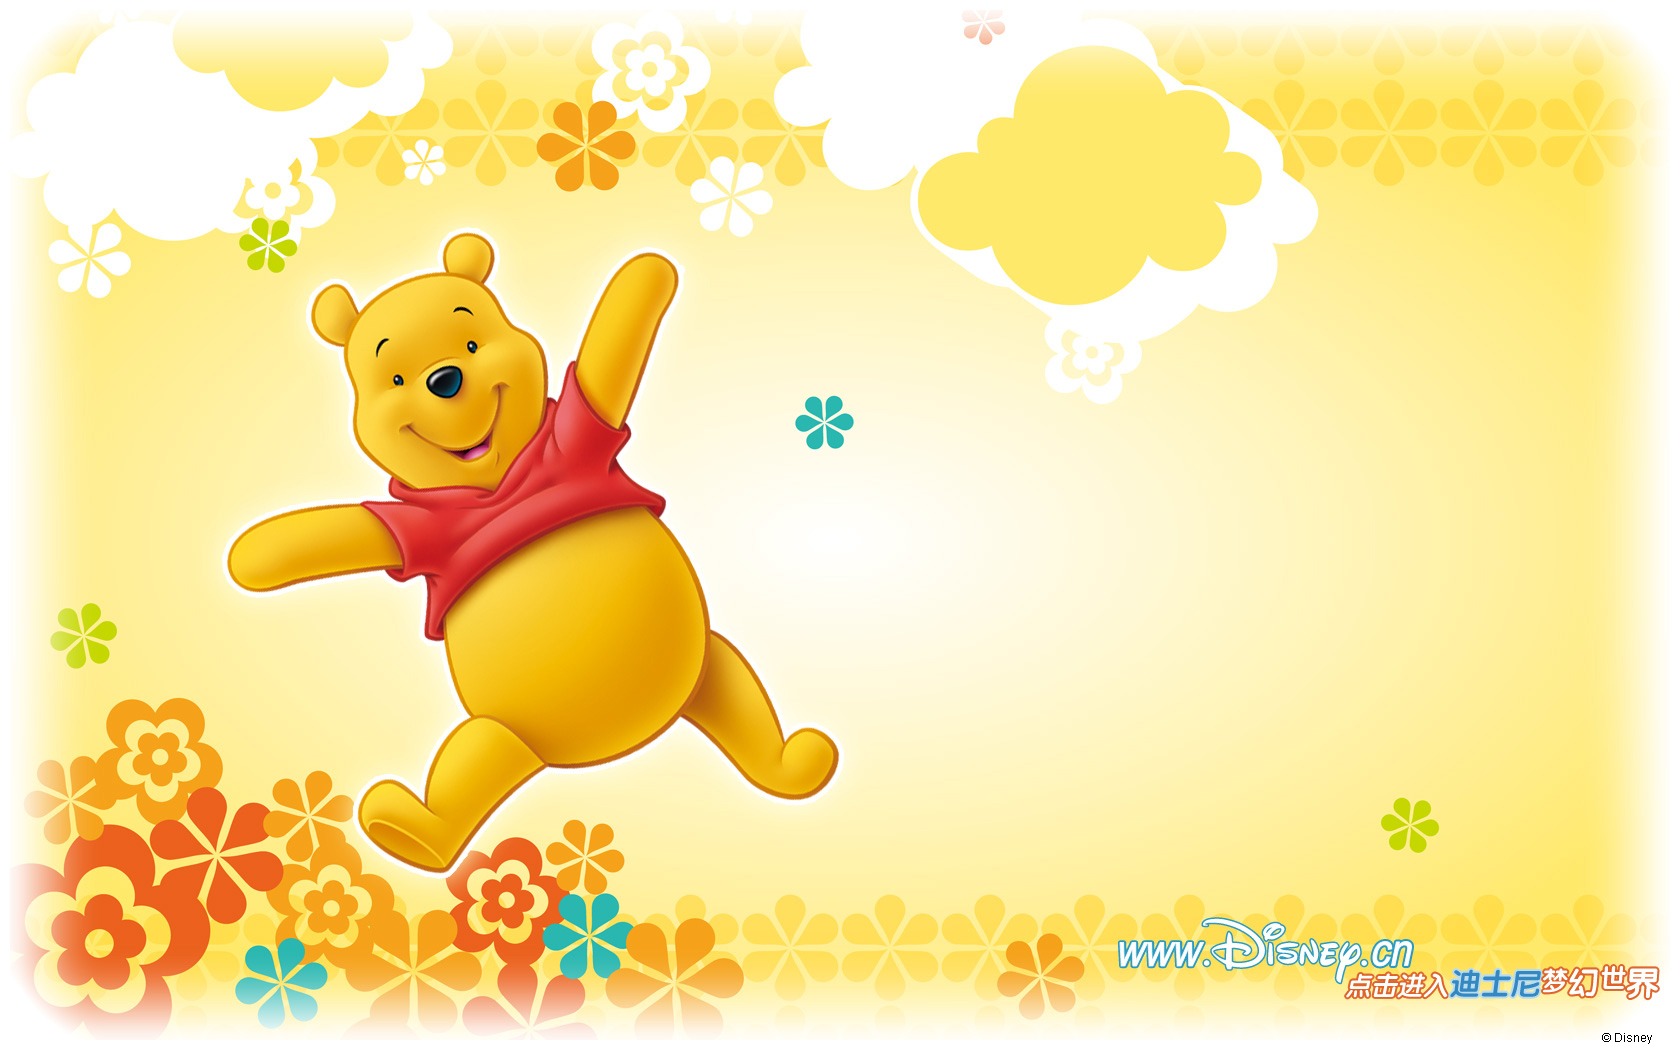 Winnie the Pooh Wallpapers 1680x1050